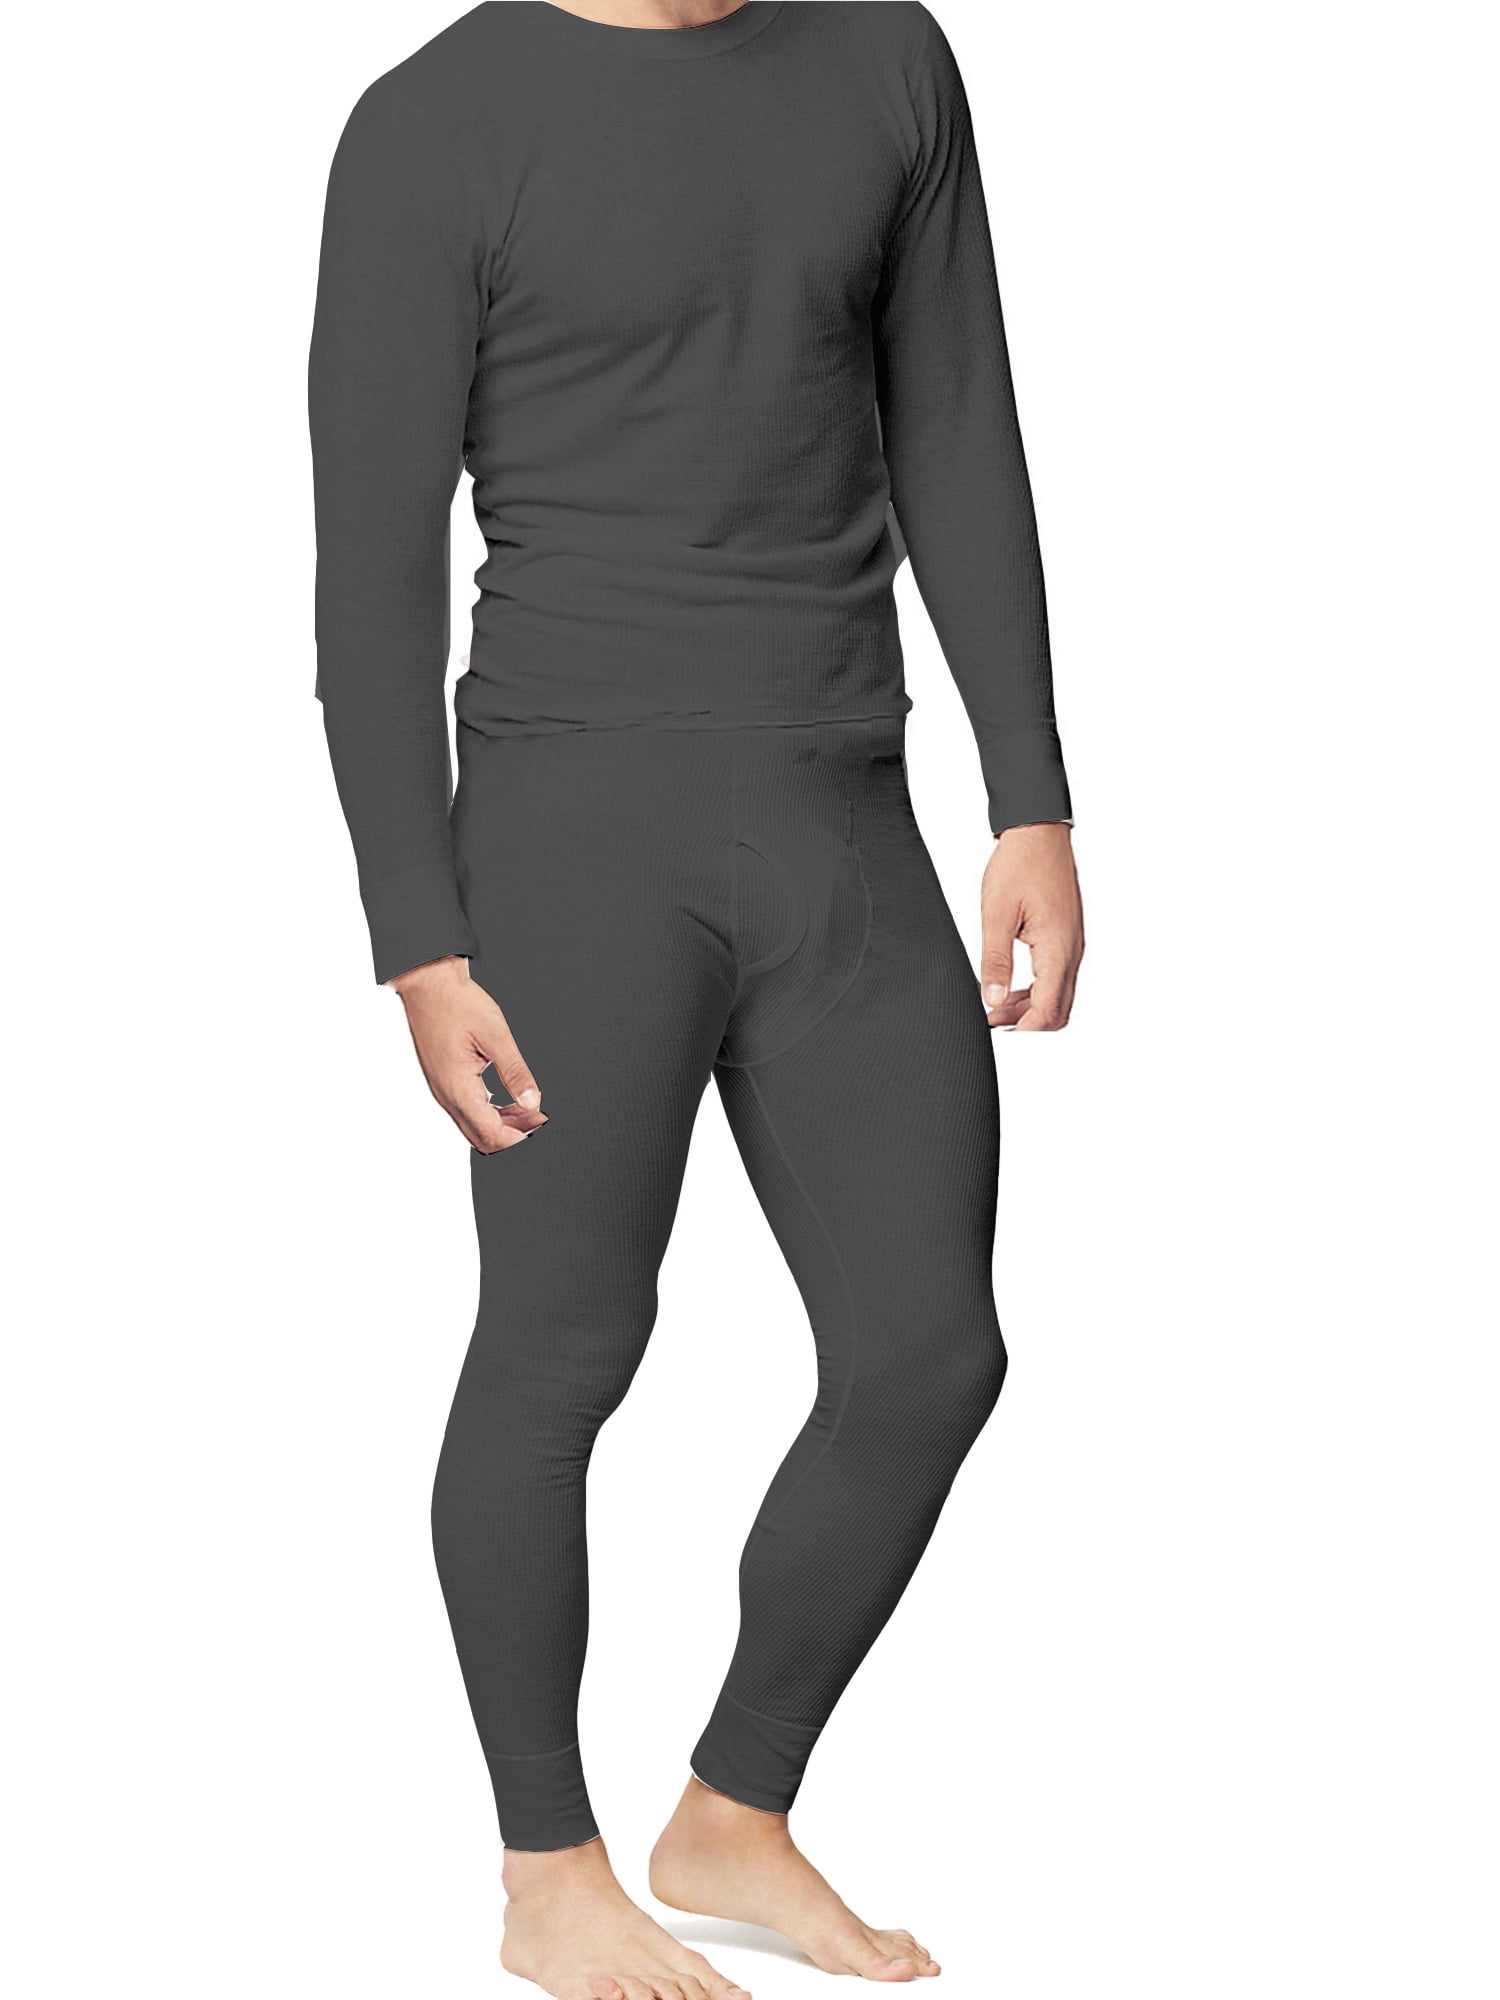 Place and Street Mens 2pc Thermal Underwear Set Cotton Long Johns 